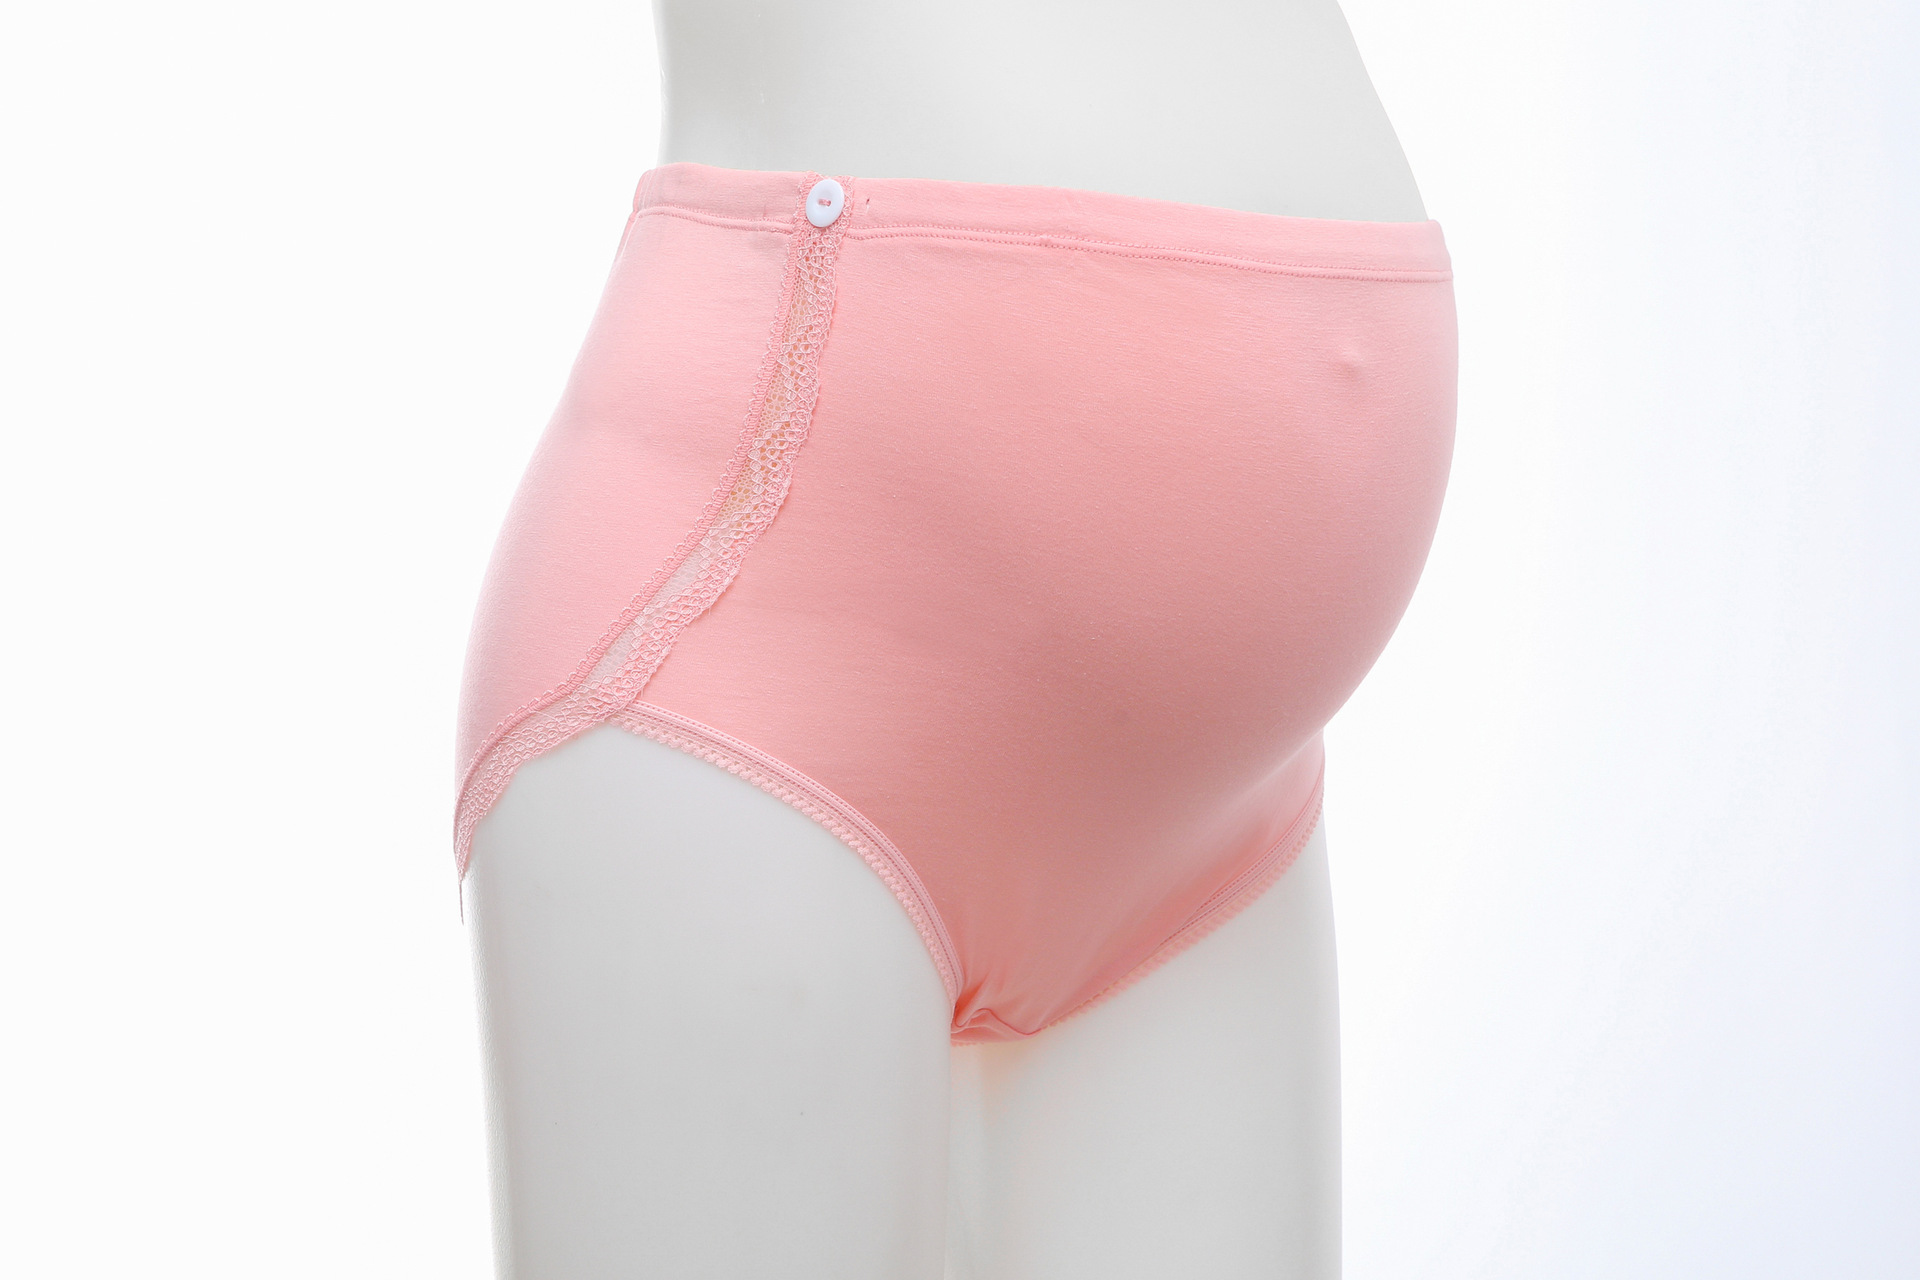 Adjustable maternity panty comfy pregnancy wear high waist cotton panty for pregnant women